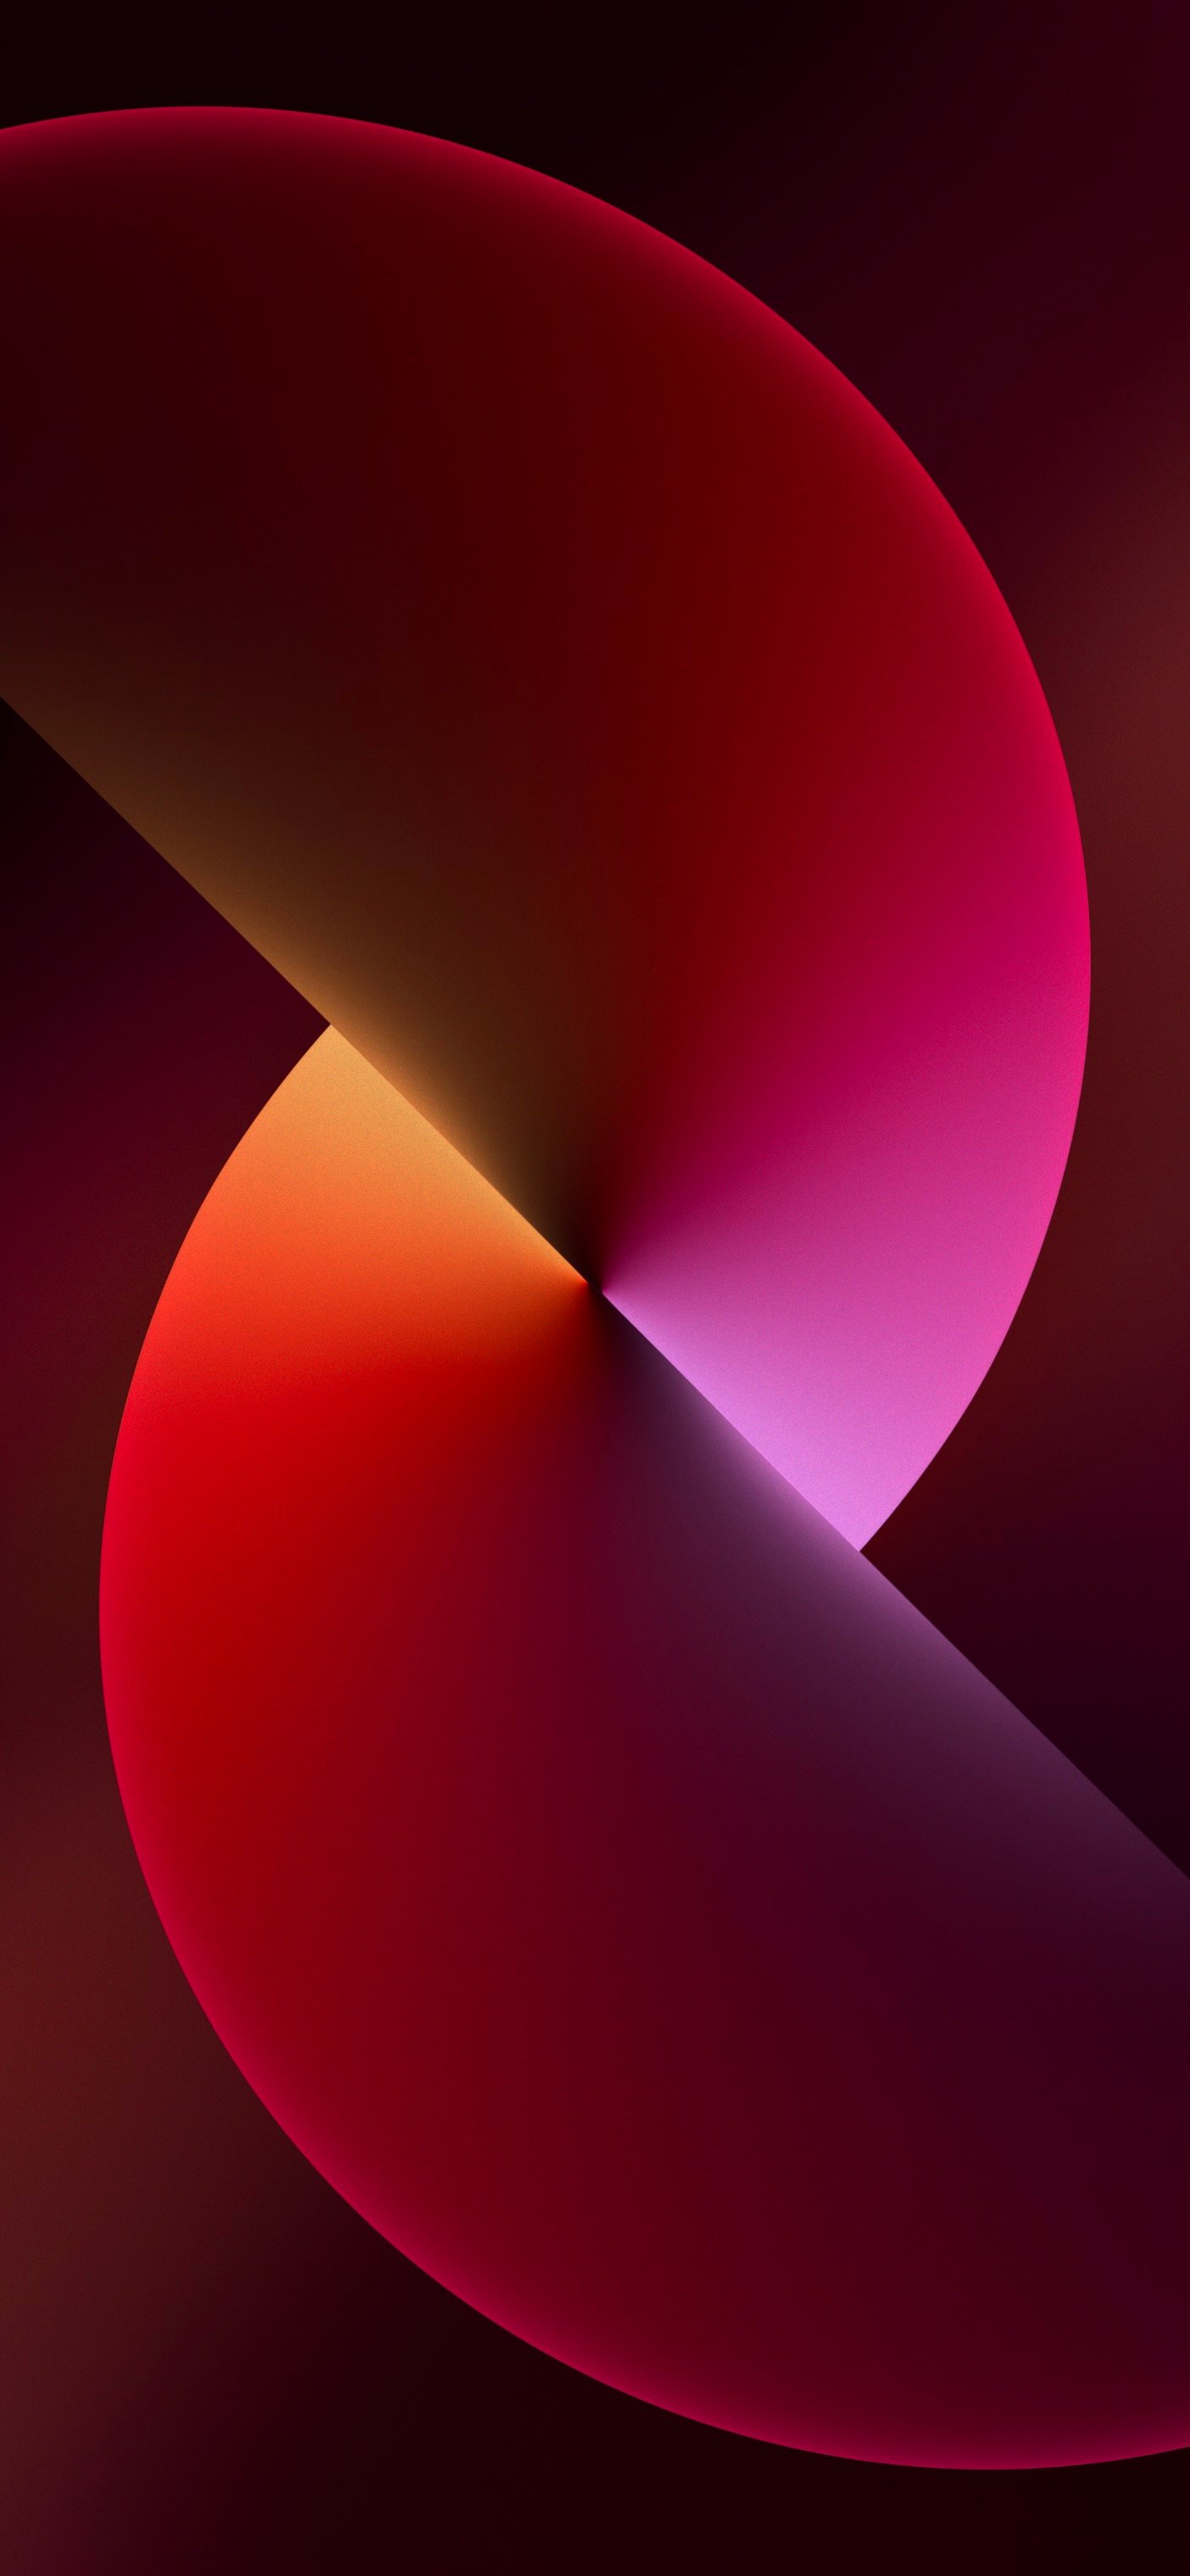 Download Apple's new iPhone 13 wallpaper right here- 9to5Mac